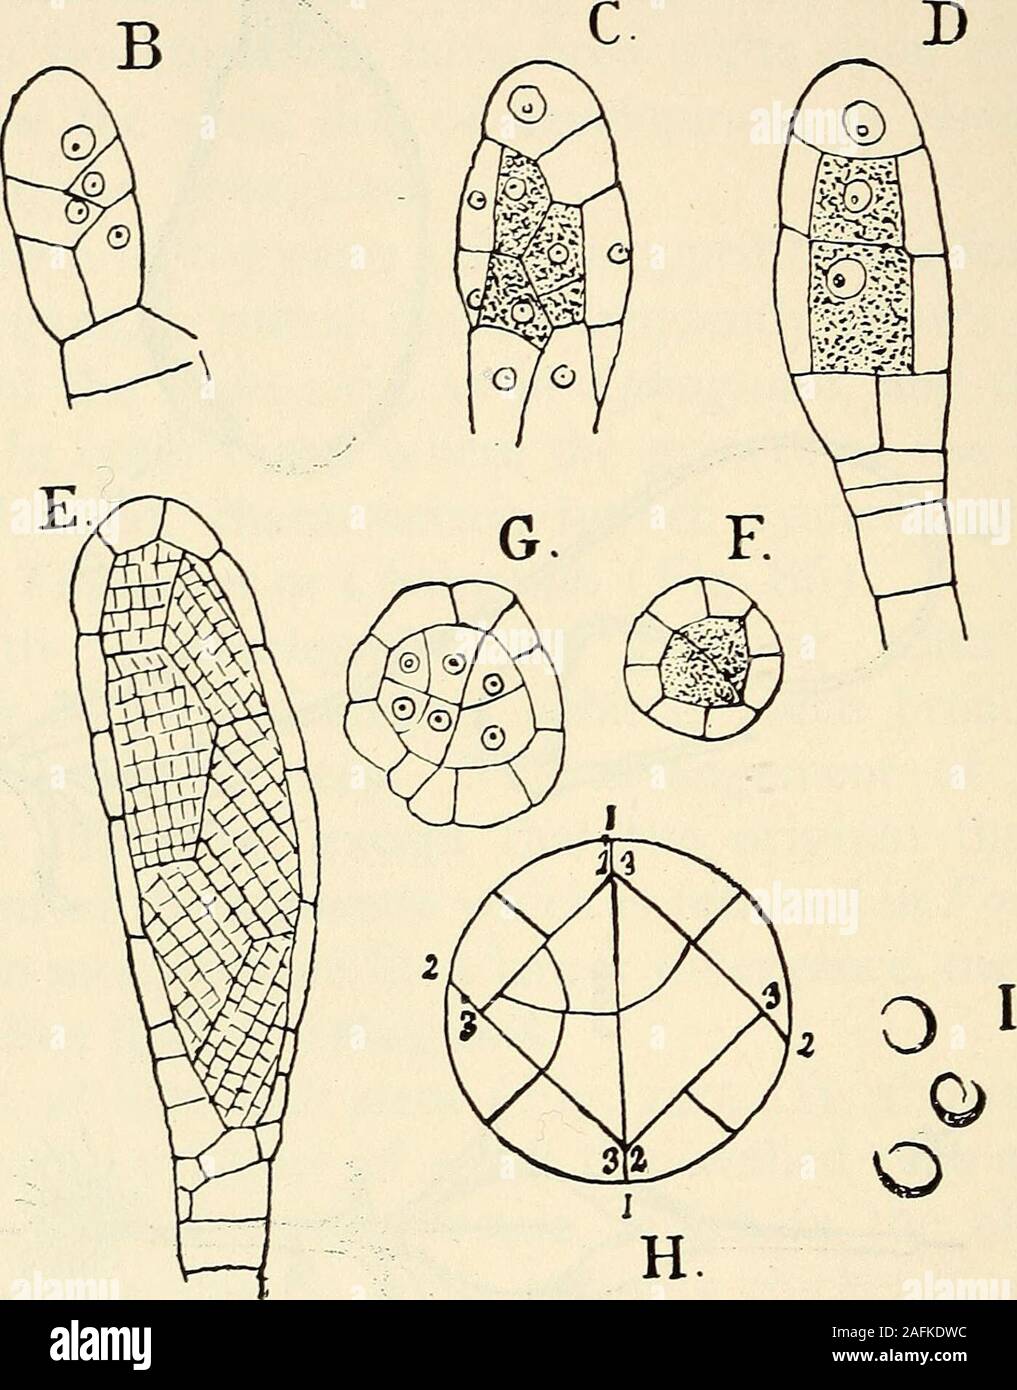 . The structure and development of mosses and ferns (Archegoniatae). Fig. 102.—Funaria hygrometrica. Development of the antheridium. A-D, Longitudinalsections of young stages, X600; D is cut in a plane at right angles to C; E, opticalsection of an older stage, X300; G, F, cross-sections of young antheridia, X600;H, diagram showing the first divisions in the antheridium; I, young spermatozoids,X1200. The outer cell either becomes at once the mother cell of theantheridium, or other transverse walls may occur, so that ashort pedicel is first formed (Fig. 102, A). Finally in theterminal cell, as i Stock Photo